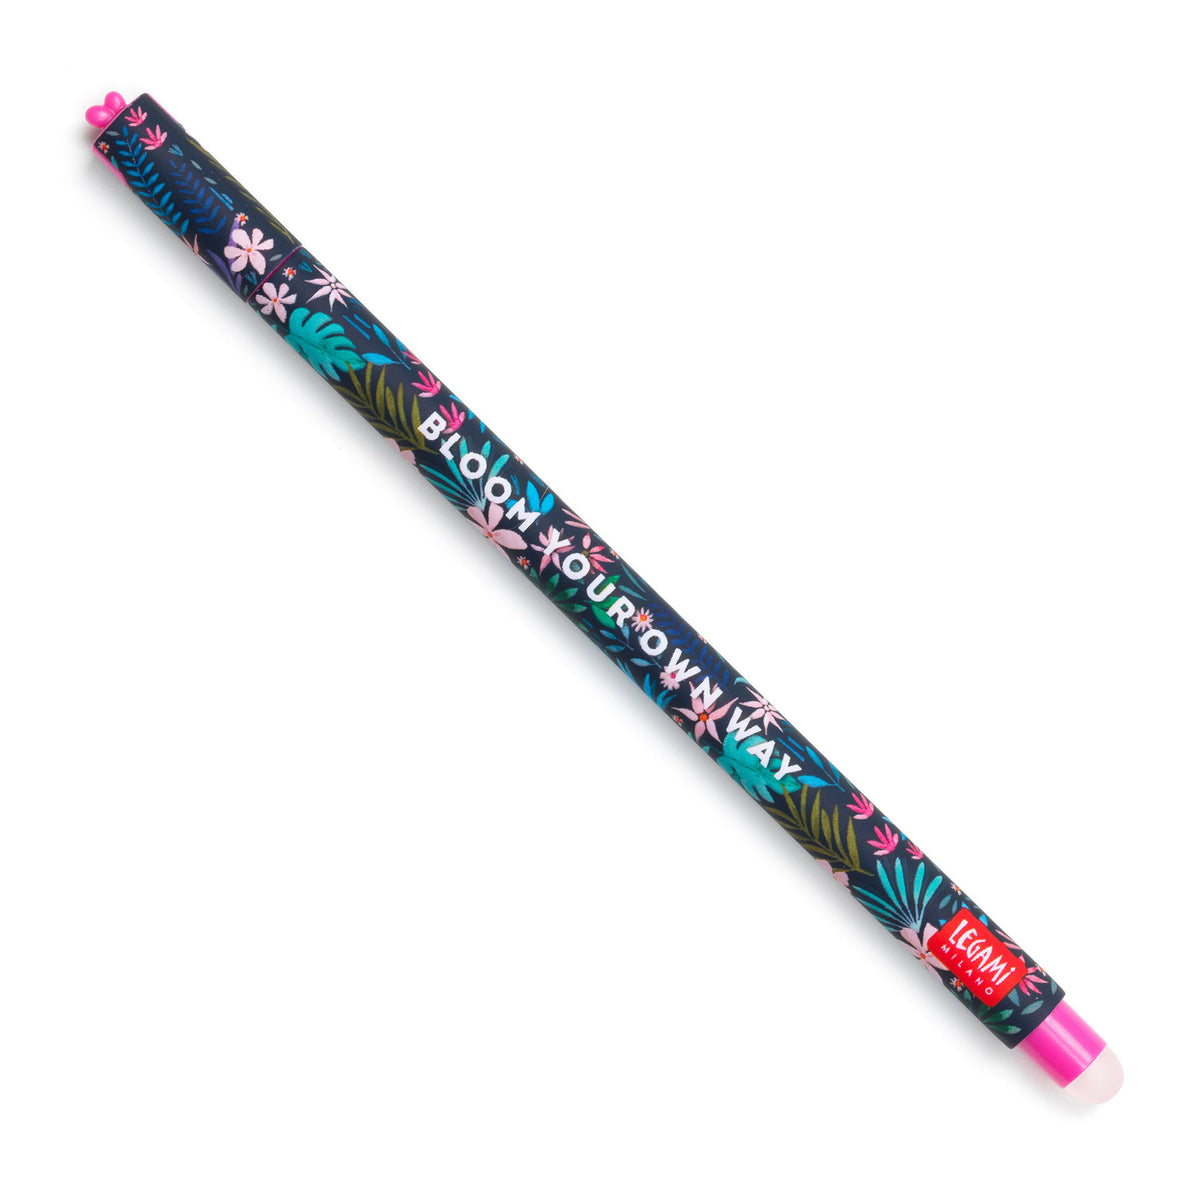 An image of a navy coloured and floral patterned erasable pen by Legami. The cap of the pen has a little heart formed on top. It has an erasable ball at the other end of the pen.